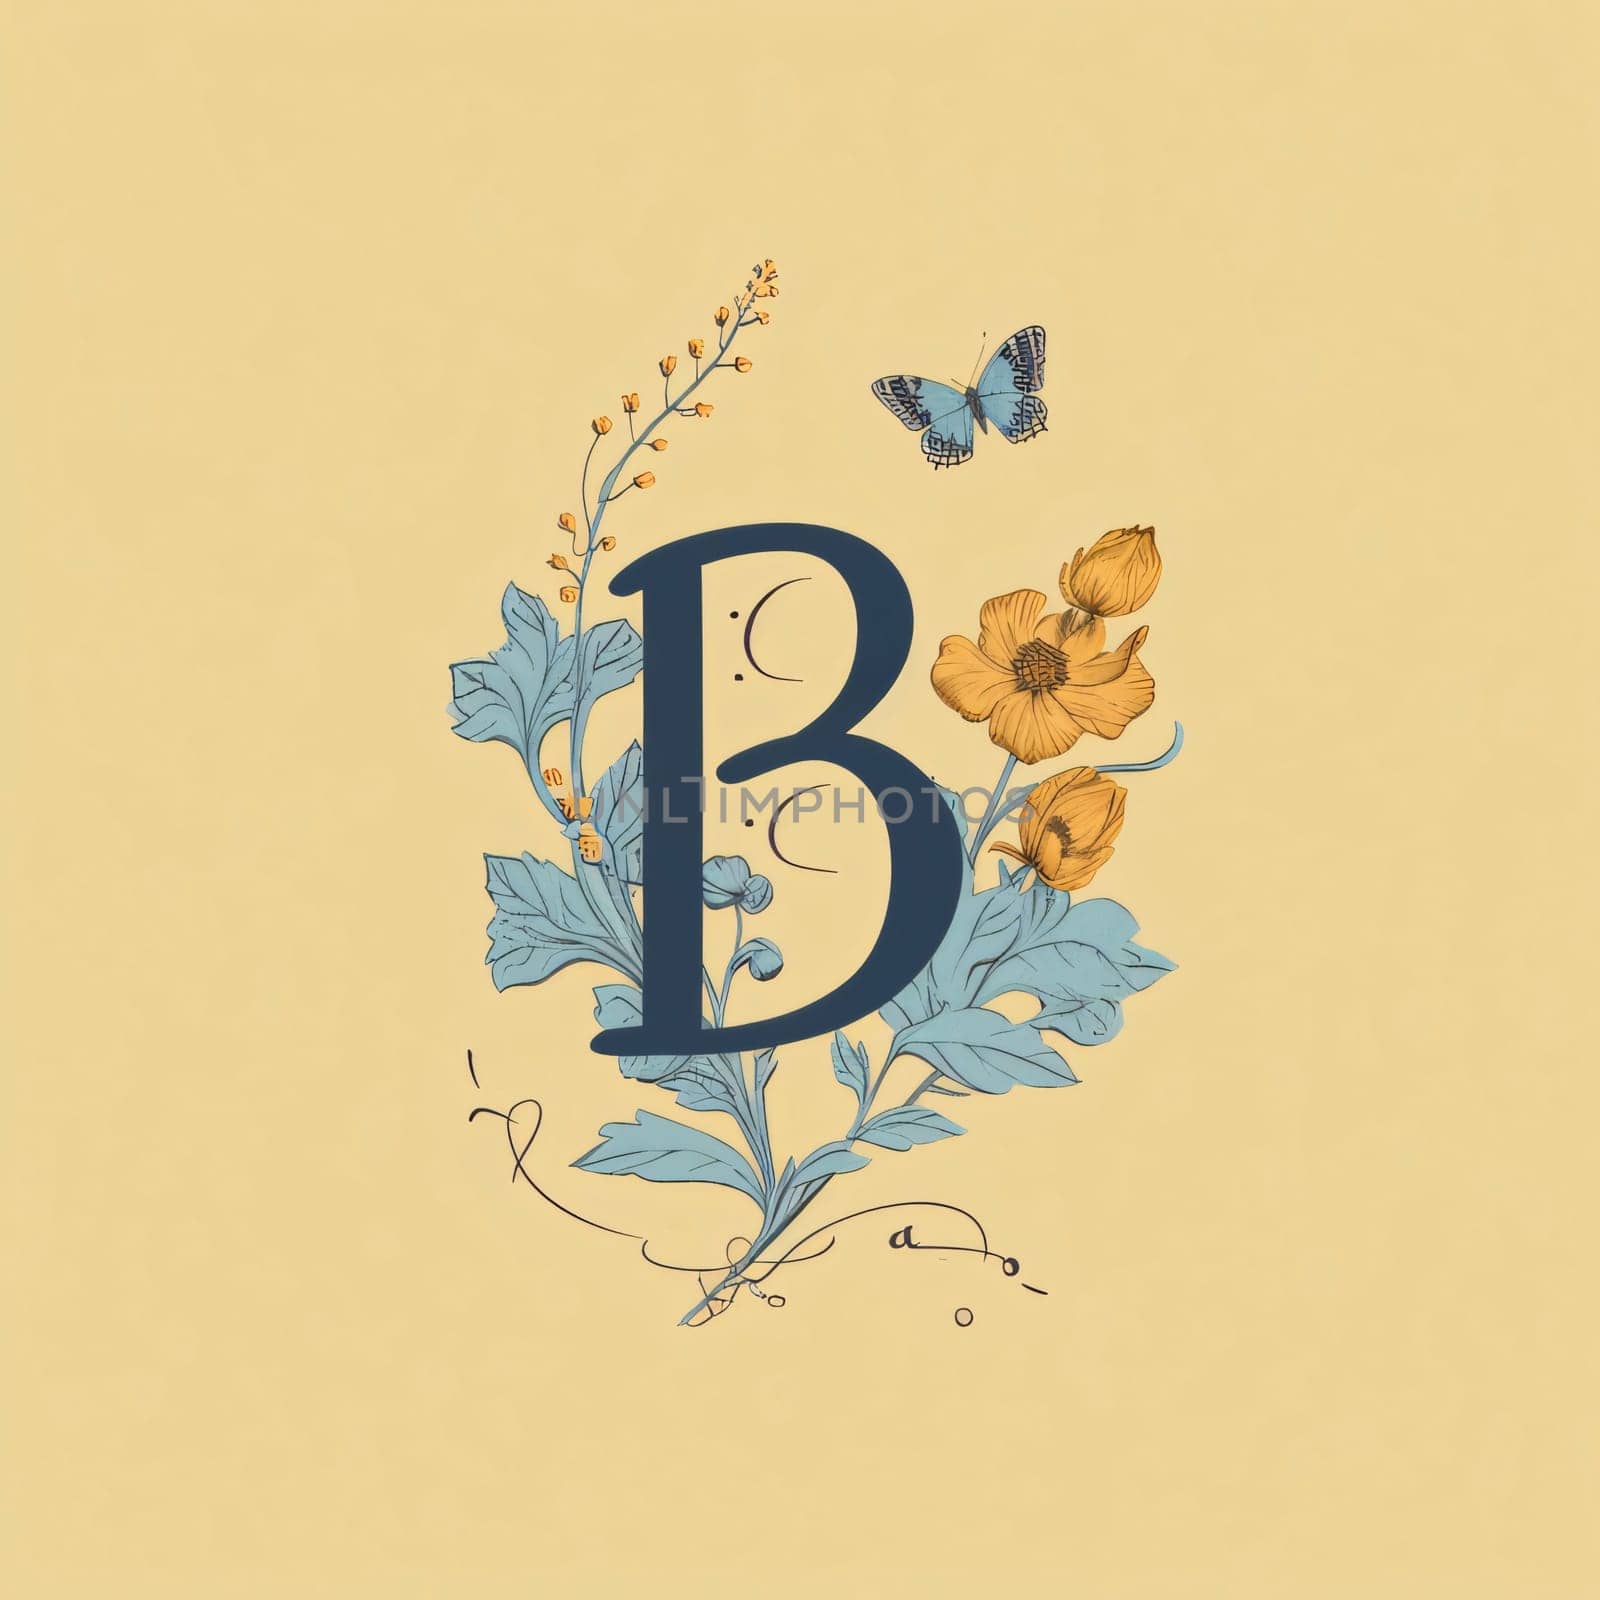 Graphic alphabet letters: Floral letter B. Hand drawn vector illustration in vintage style.